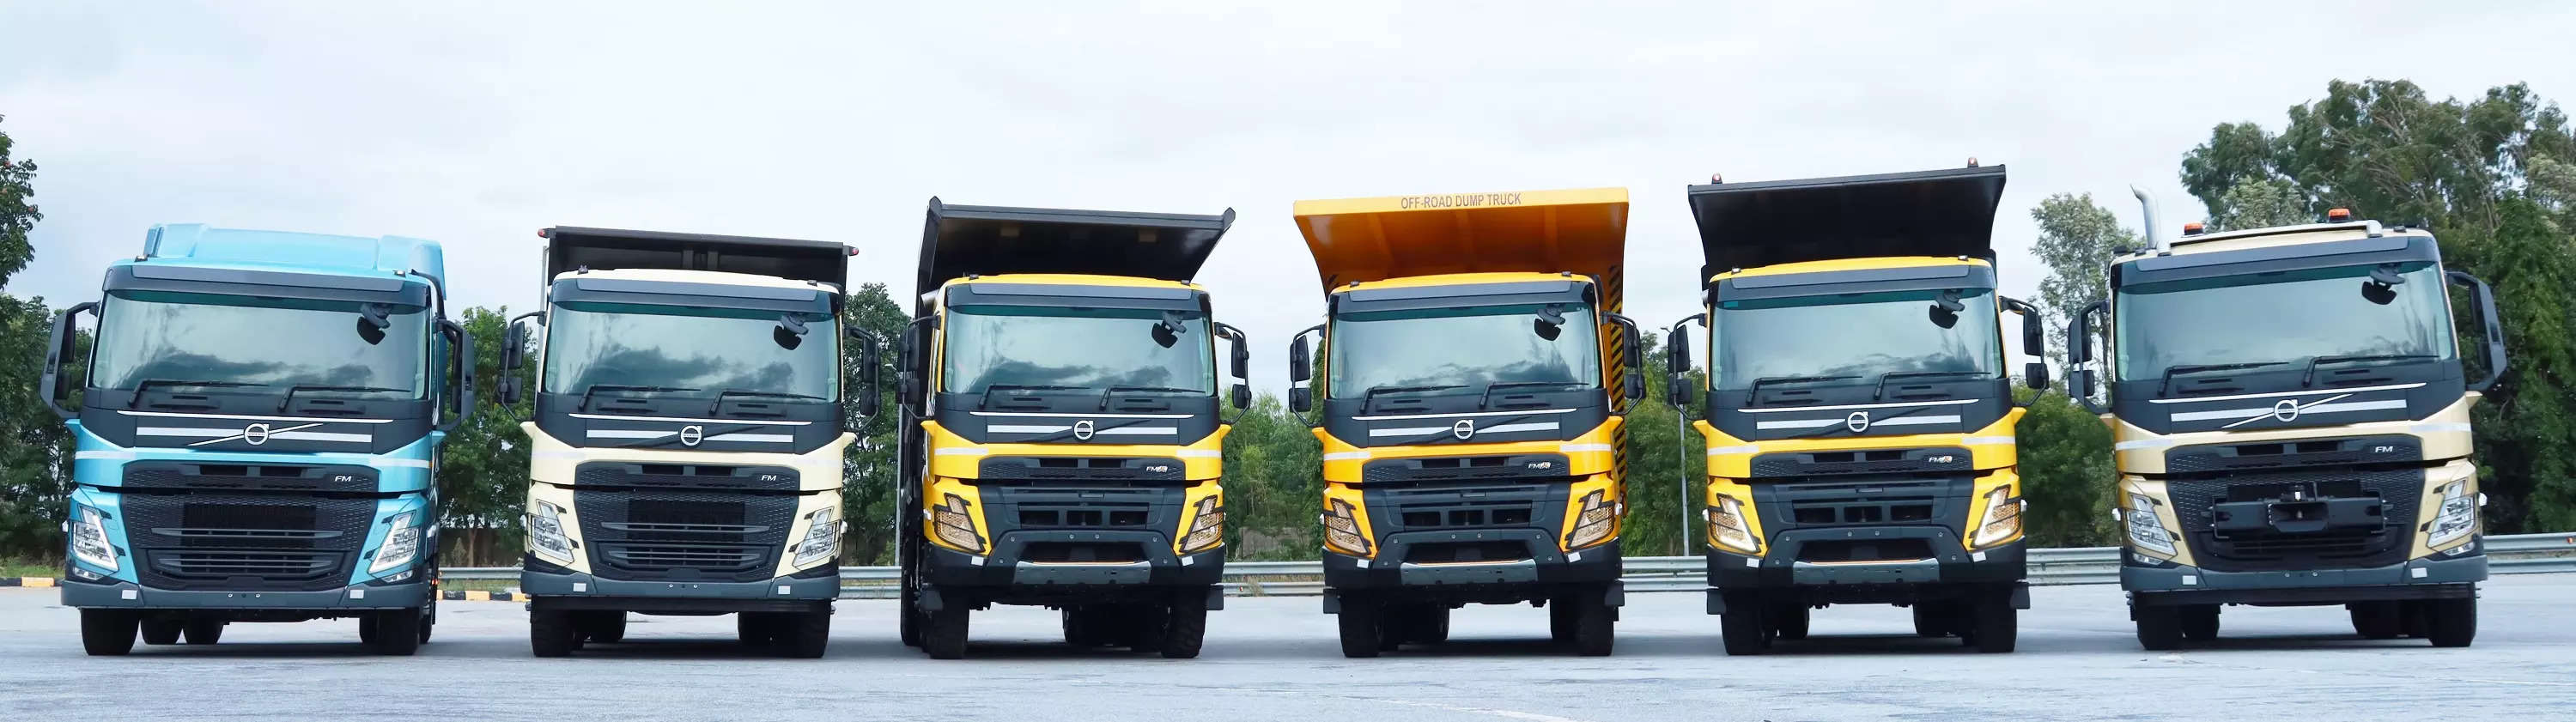  Volvo FM and FMX range of trucks combine high productivity and efficiency, unmatched safety, excellent driver comfort and enhanced connectivity features.